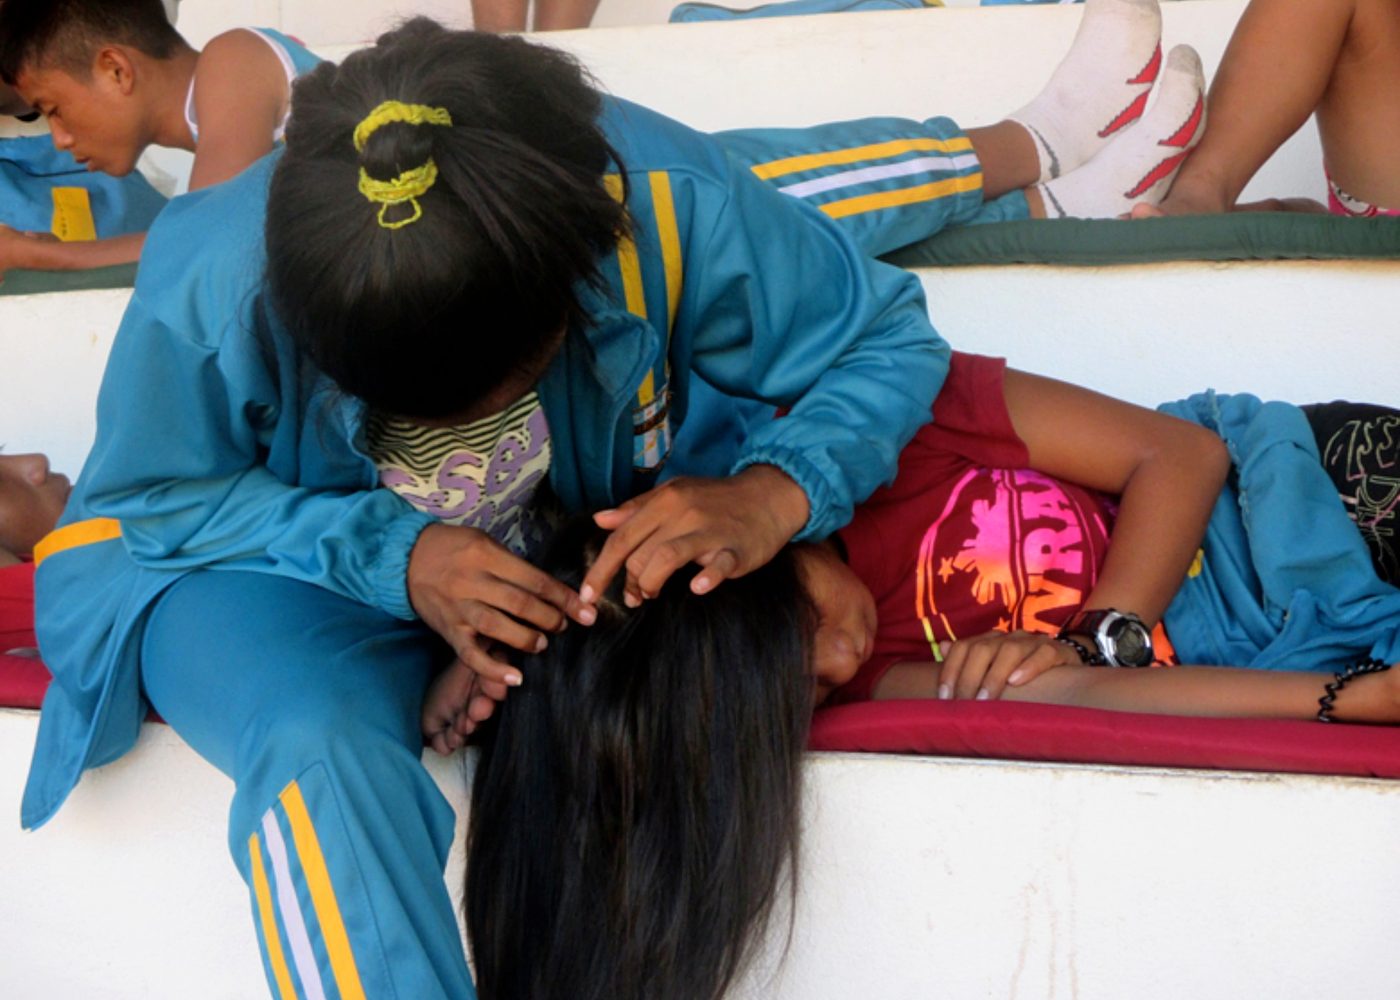 A GIRL THING. Coach and athlete shows sisterly bond while resting at the Binirayan Sports Complex.  